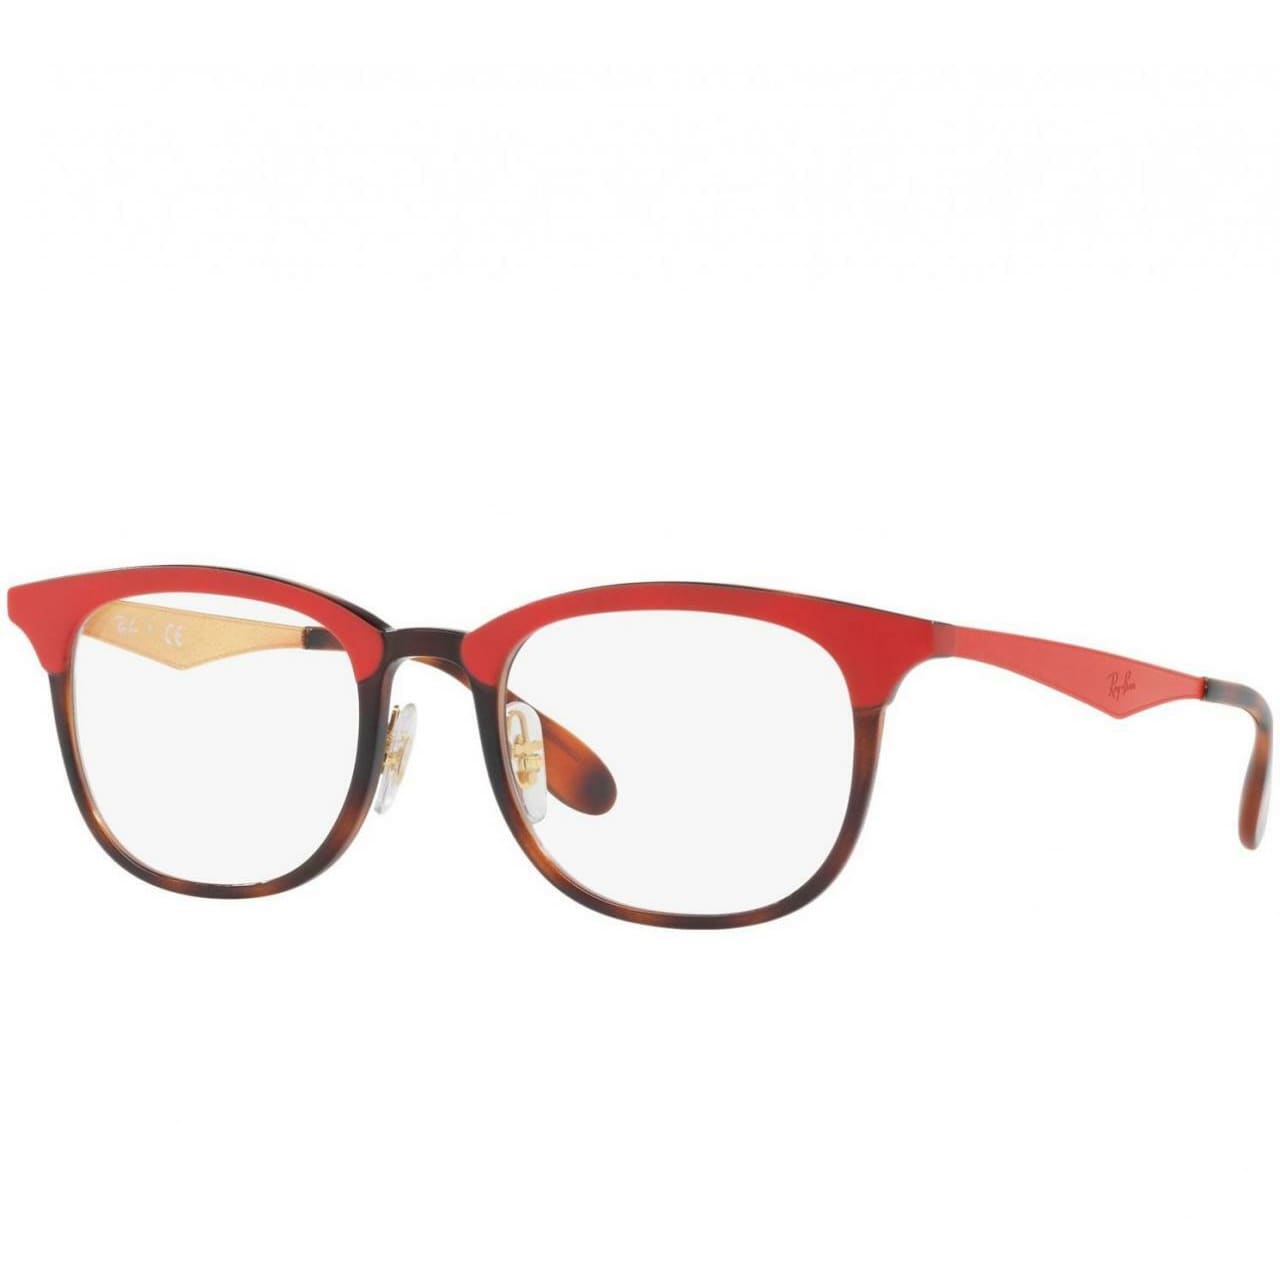 Ray-Ban RB7112-5730 Red Gold Injected Round Unisex Eyeglasses 8053672782141